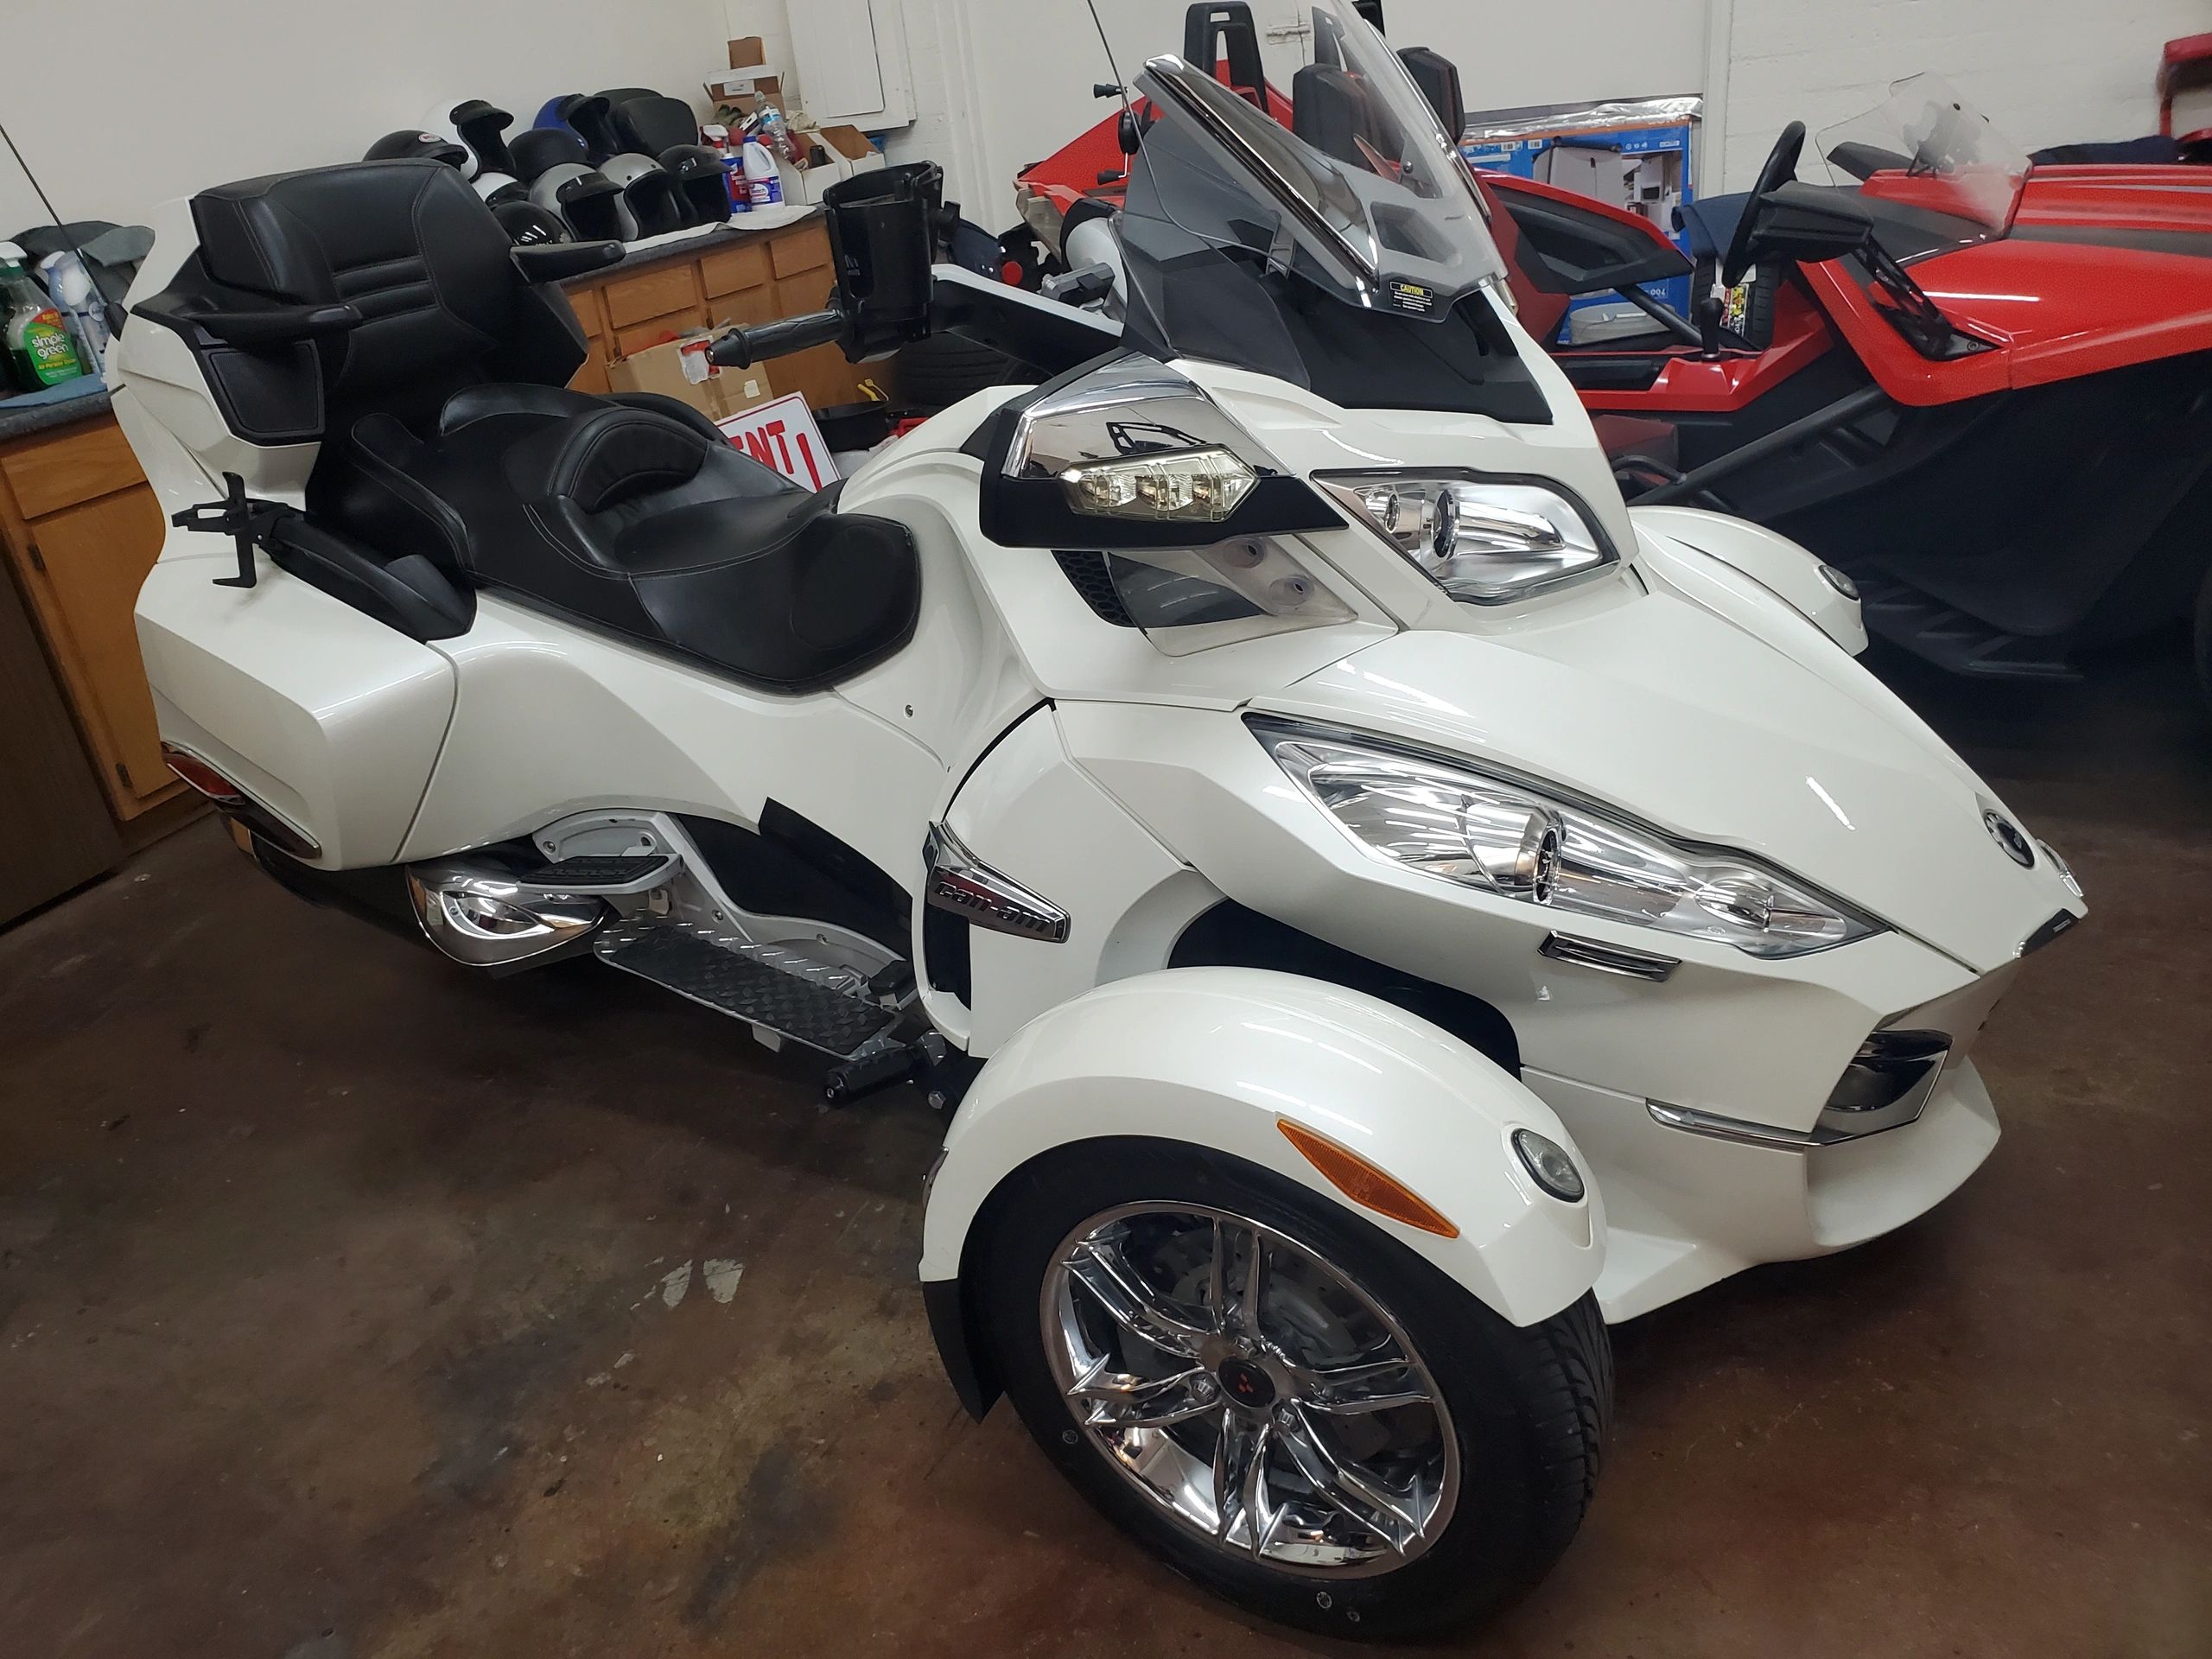 Rent a Can-Am Spyder in Arizona!